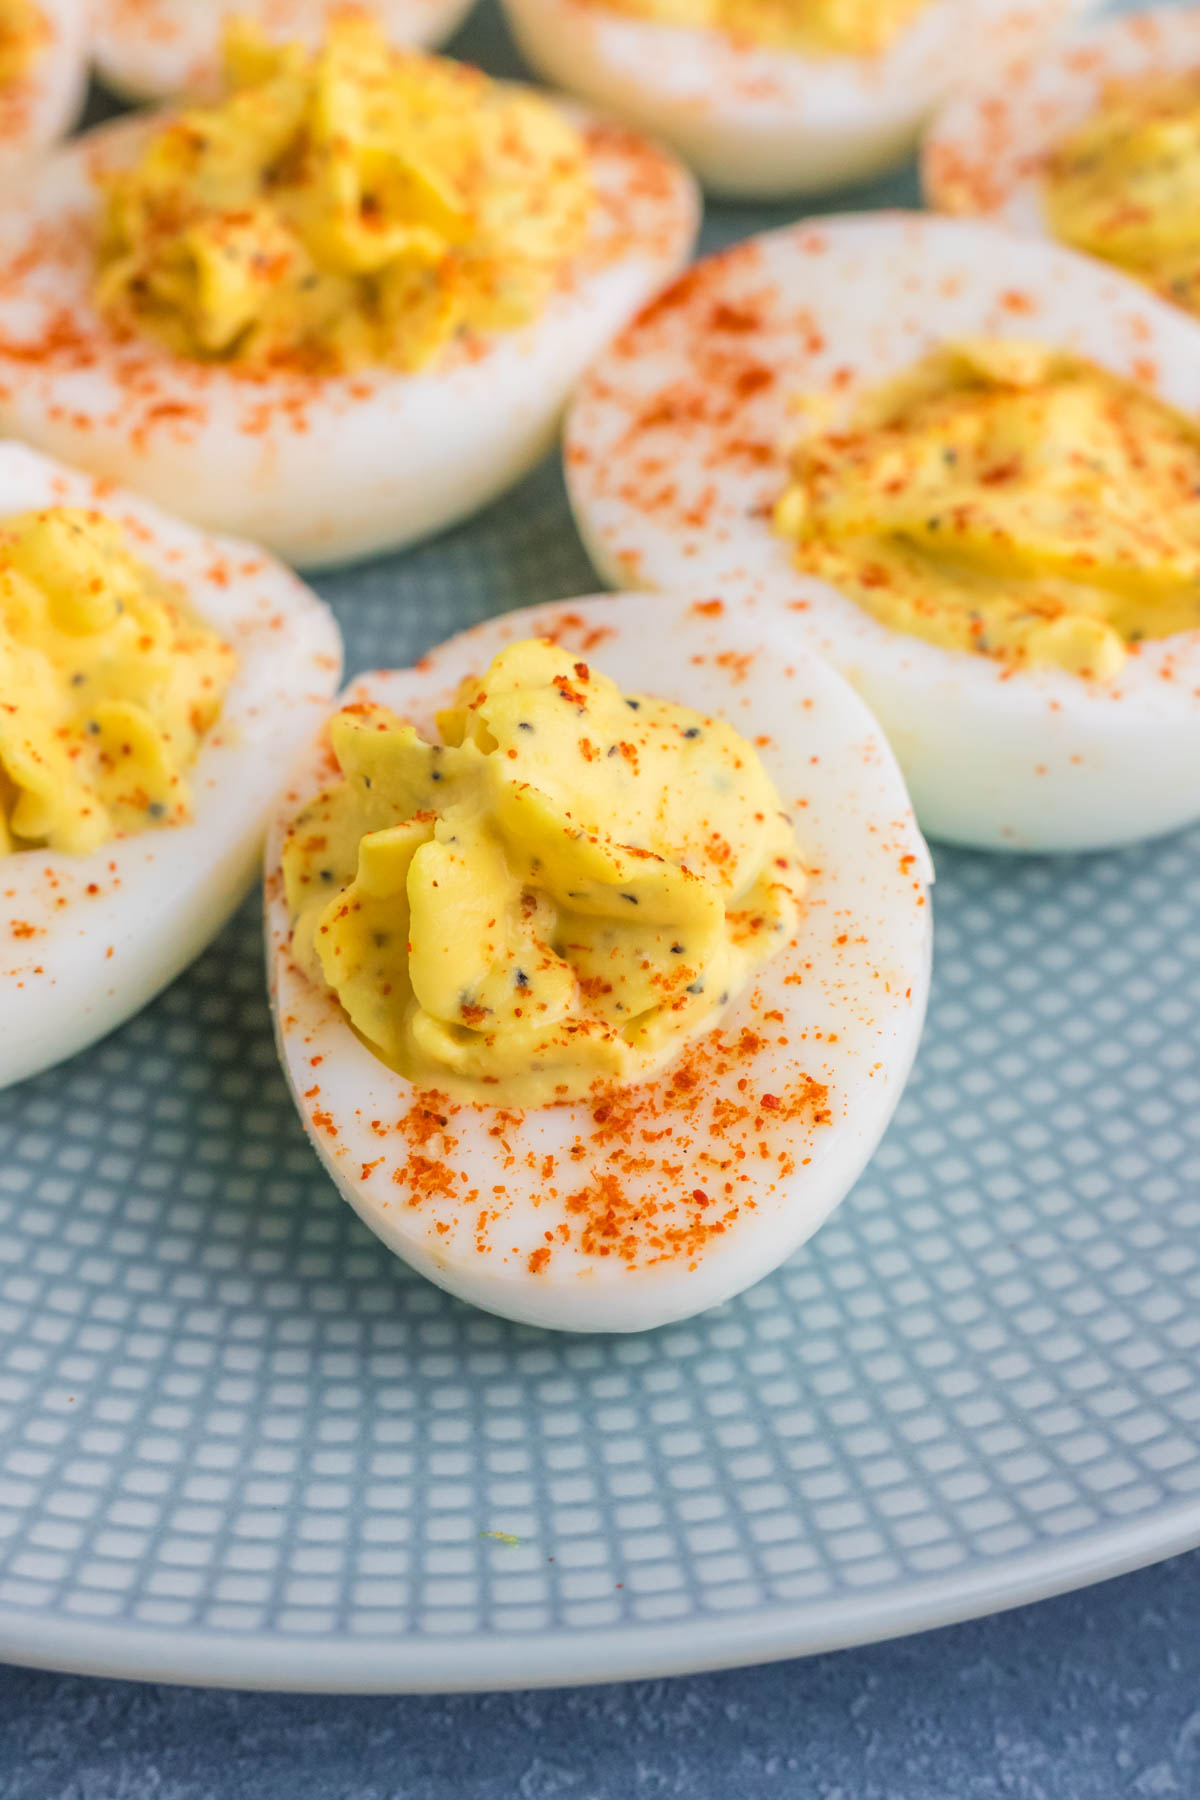 Deviled eggs sprinkled with paprika served on a blue plate.